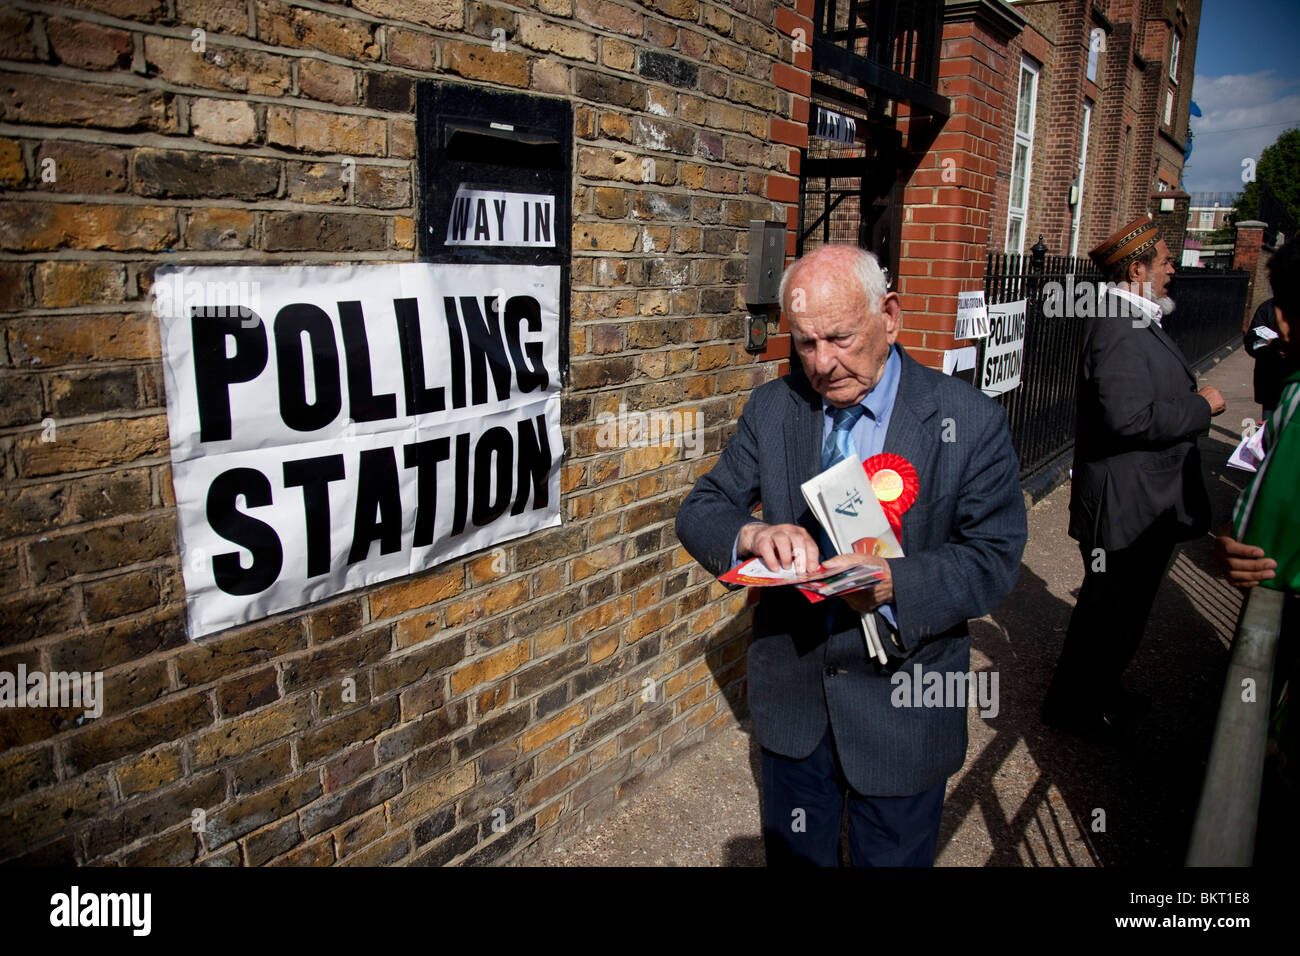 Voter from the more traditional white working class community, at a Polling Station in Whitechapel, in the East End of London. Stock Photo